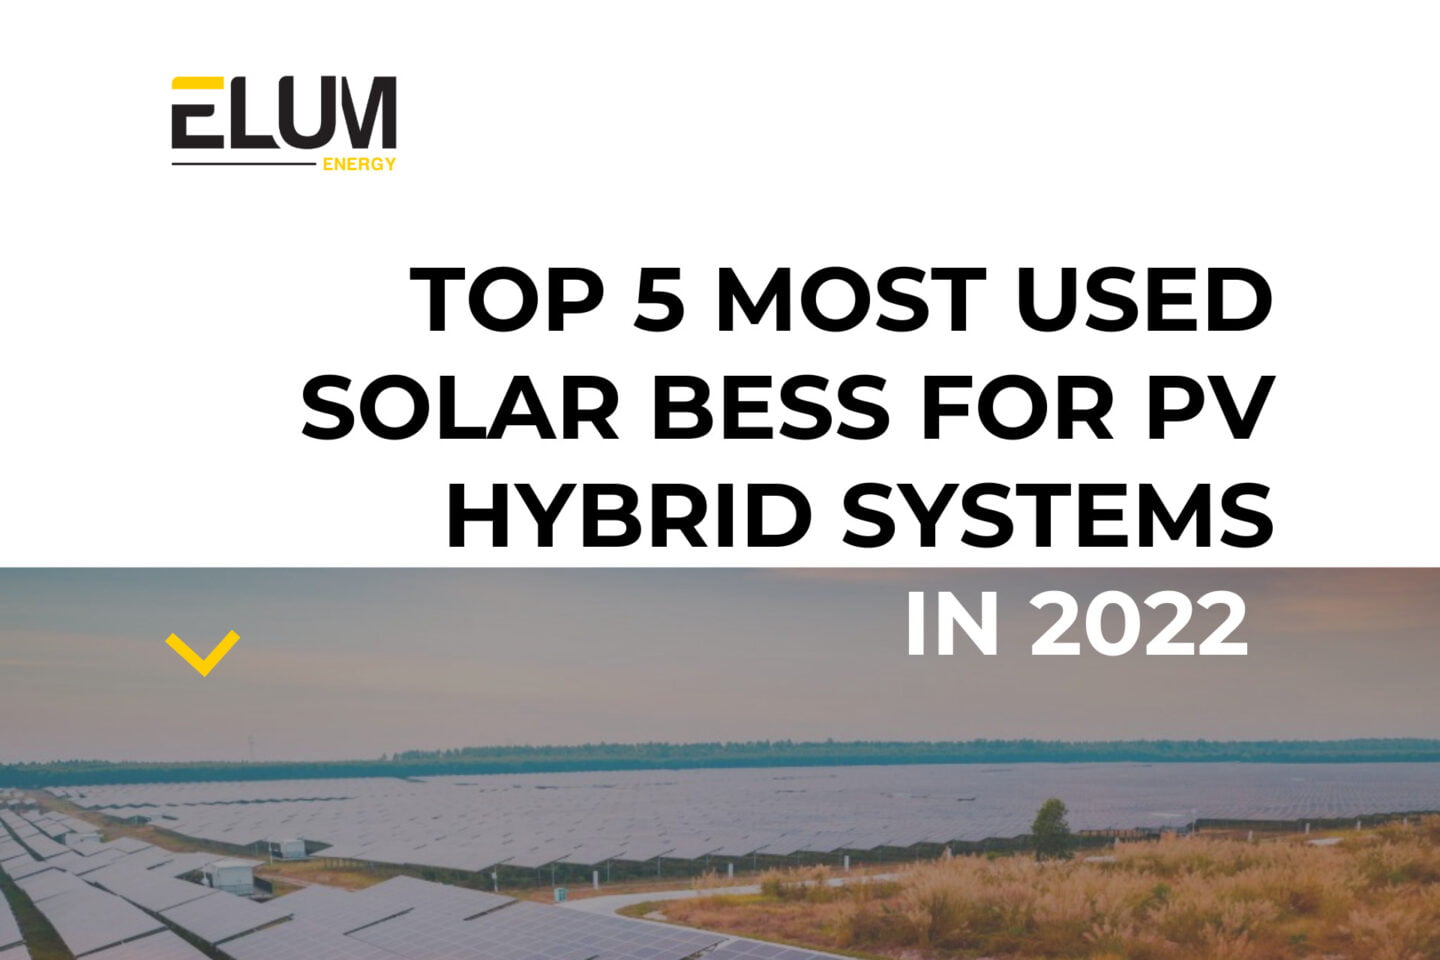 Top 5 most used solar BESS for PV hybrid systems in 2022